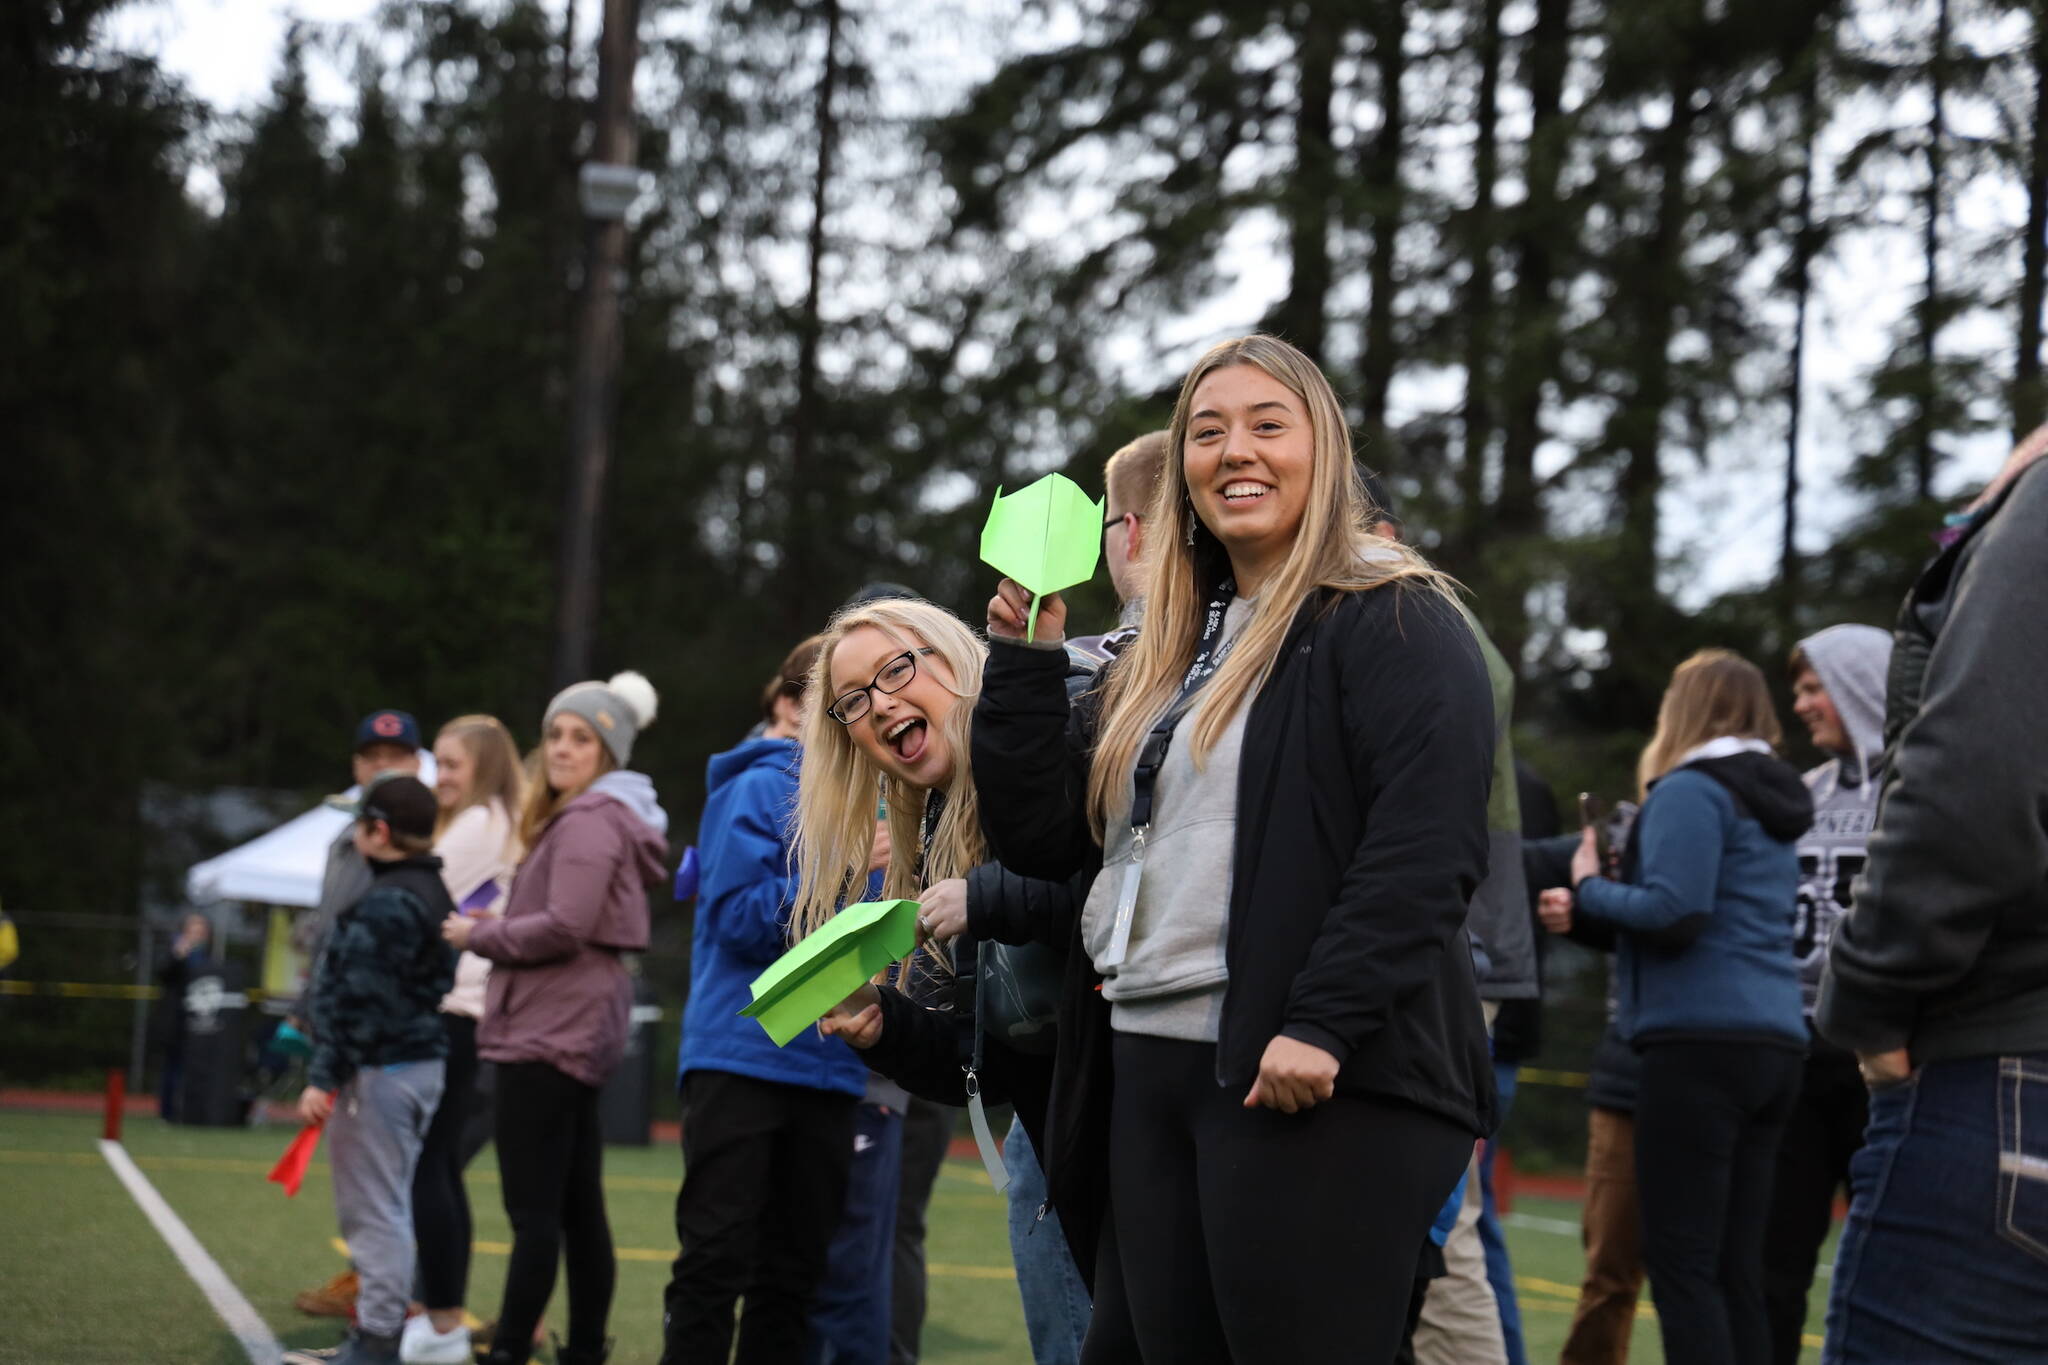 Michaela Meneoza (left) and Anne Coogan (right) smile before launching their paper airplanes during a half-time contest at the Juneau Alumni Football game Friday evening at Adair-Kennedy Field. (Clarise Larson / Juneau Empire)